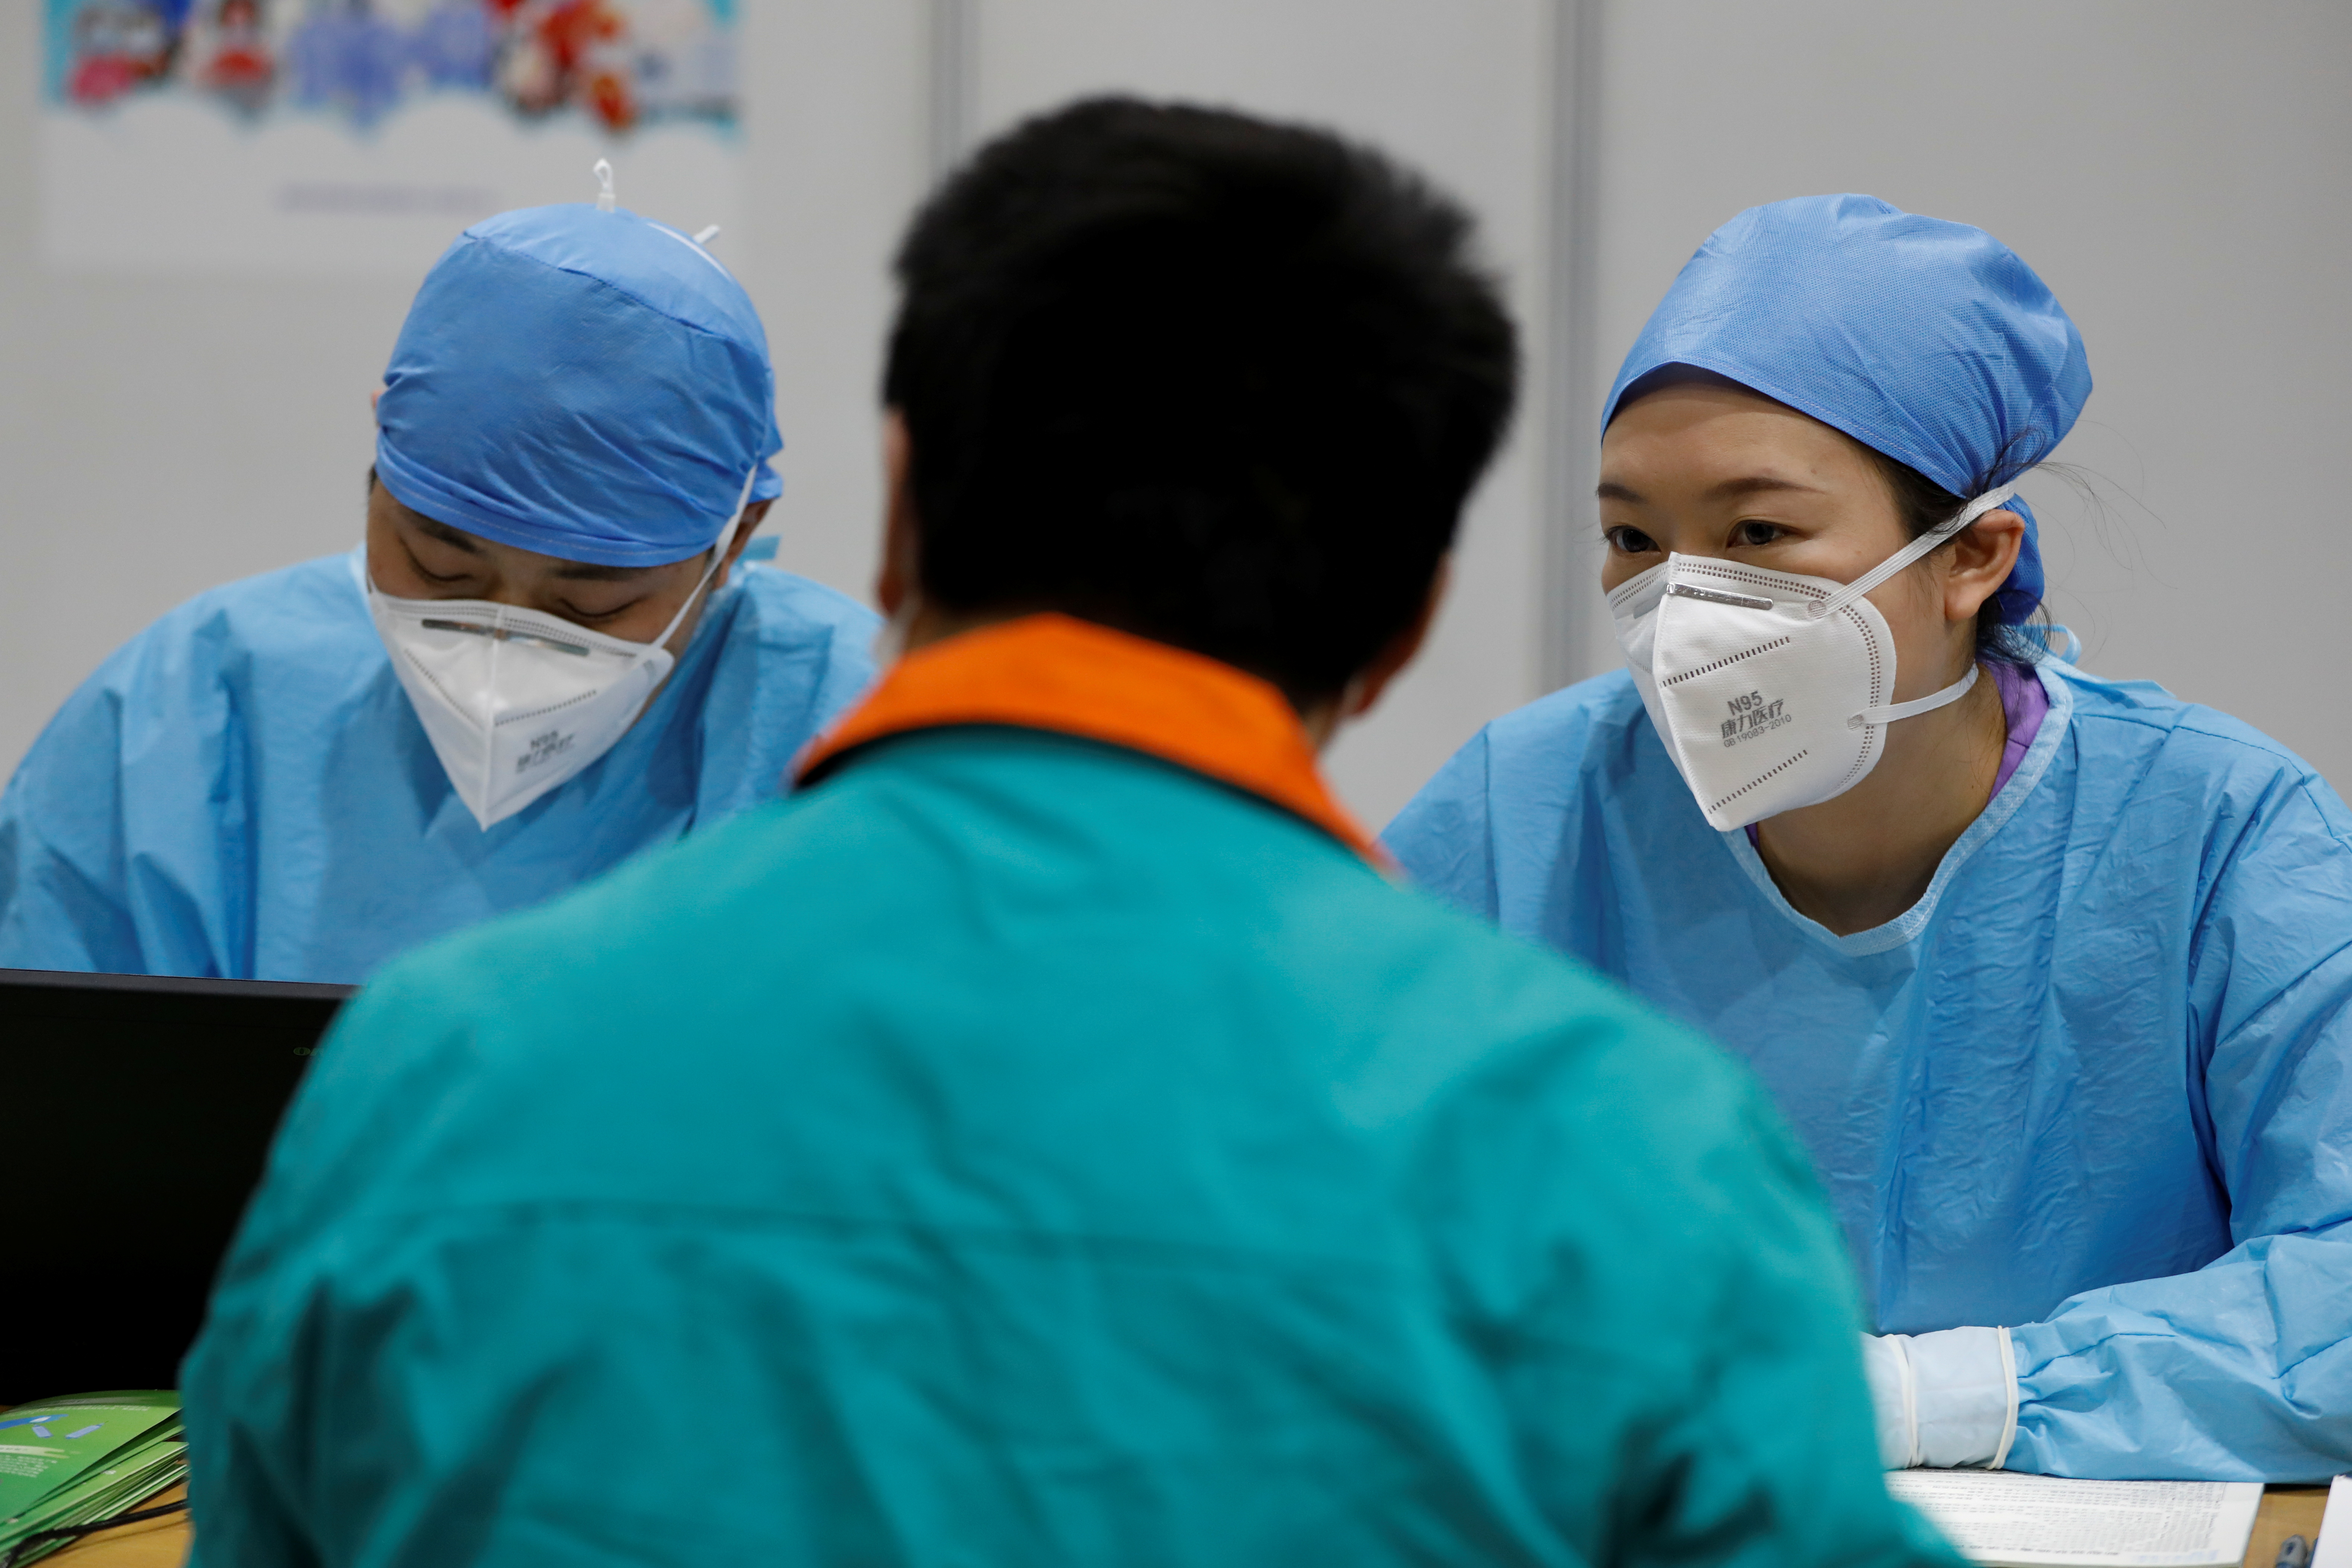 Medical workers speak with a man before he receives a dose of a coronavirus disease (COVID-19) vaccine at a vaccination site, during a government-organized visit, in Beijing, China January 15, 2021. REUTERS/Carlos Garcia Rawlins